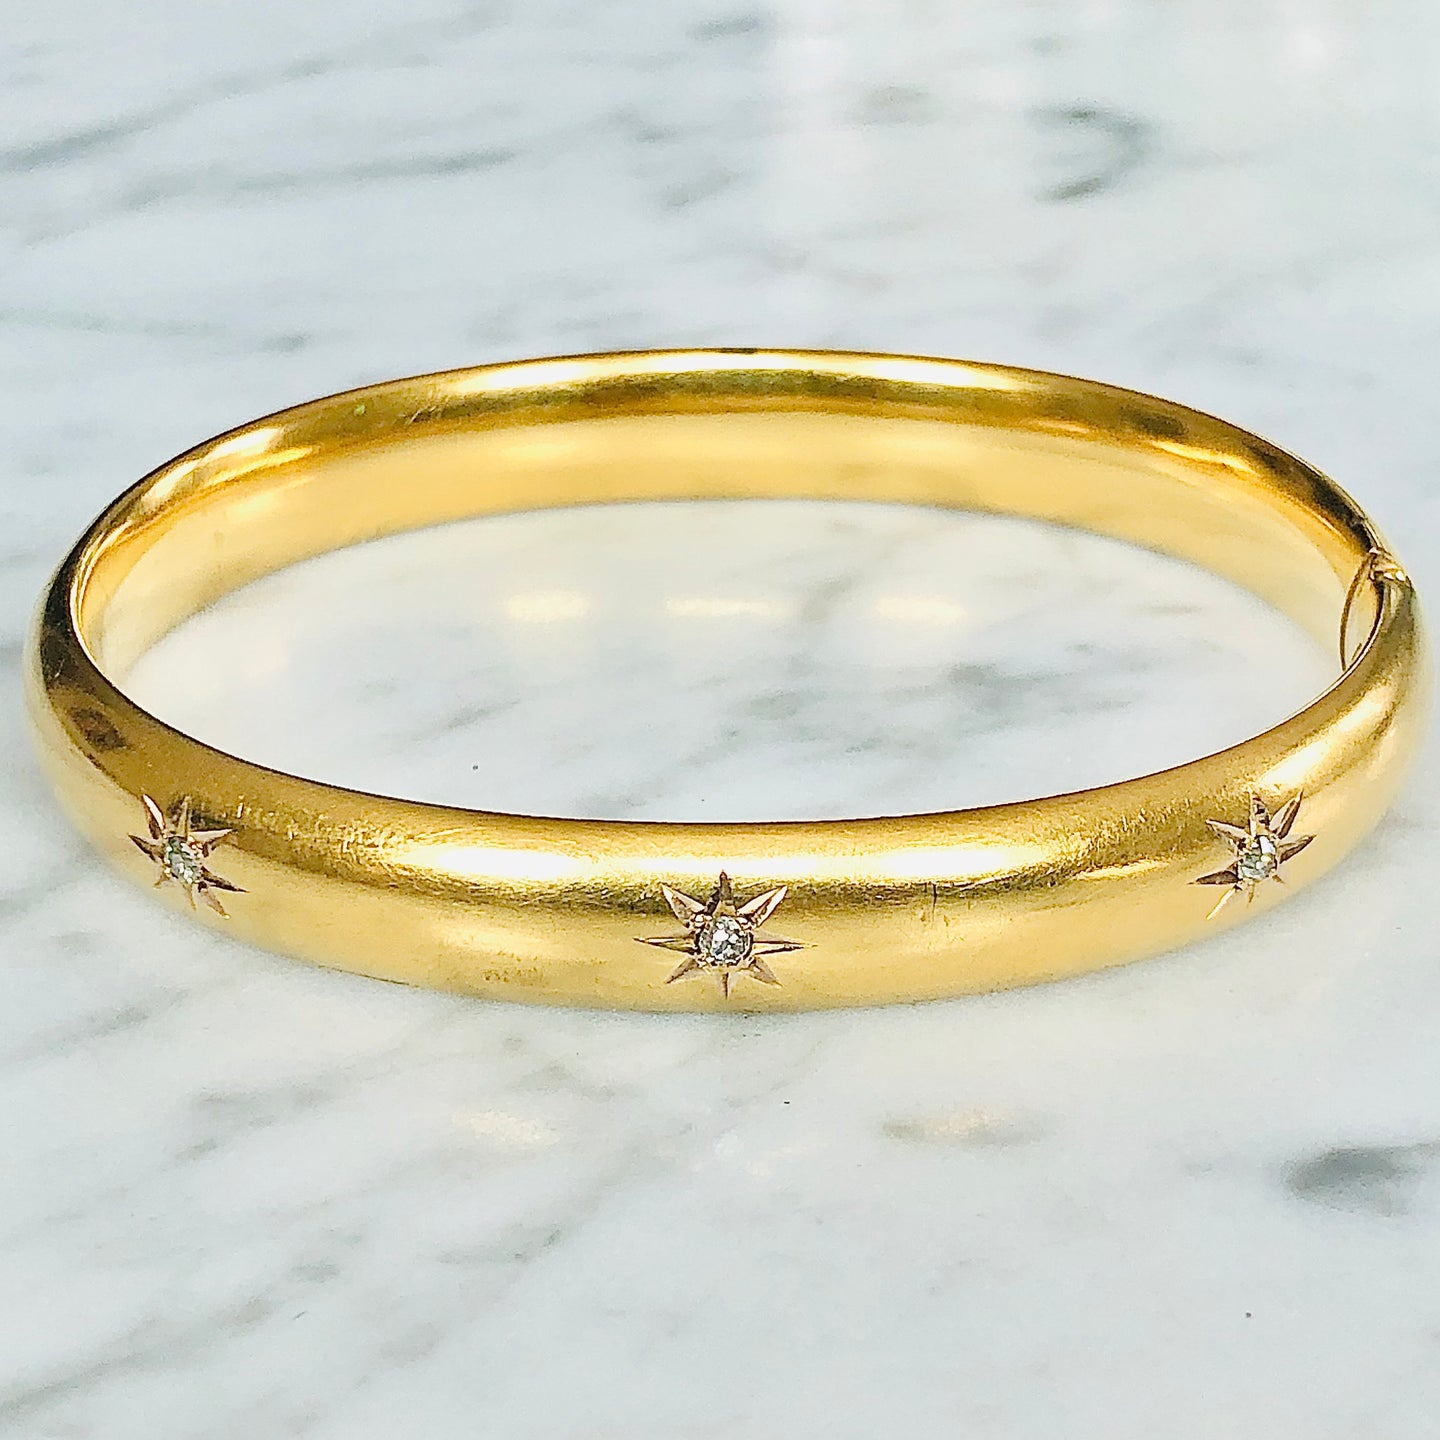 ON HOLD Gold Bangle with Diamonds